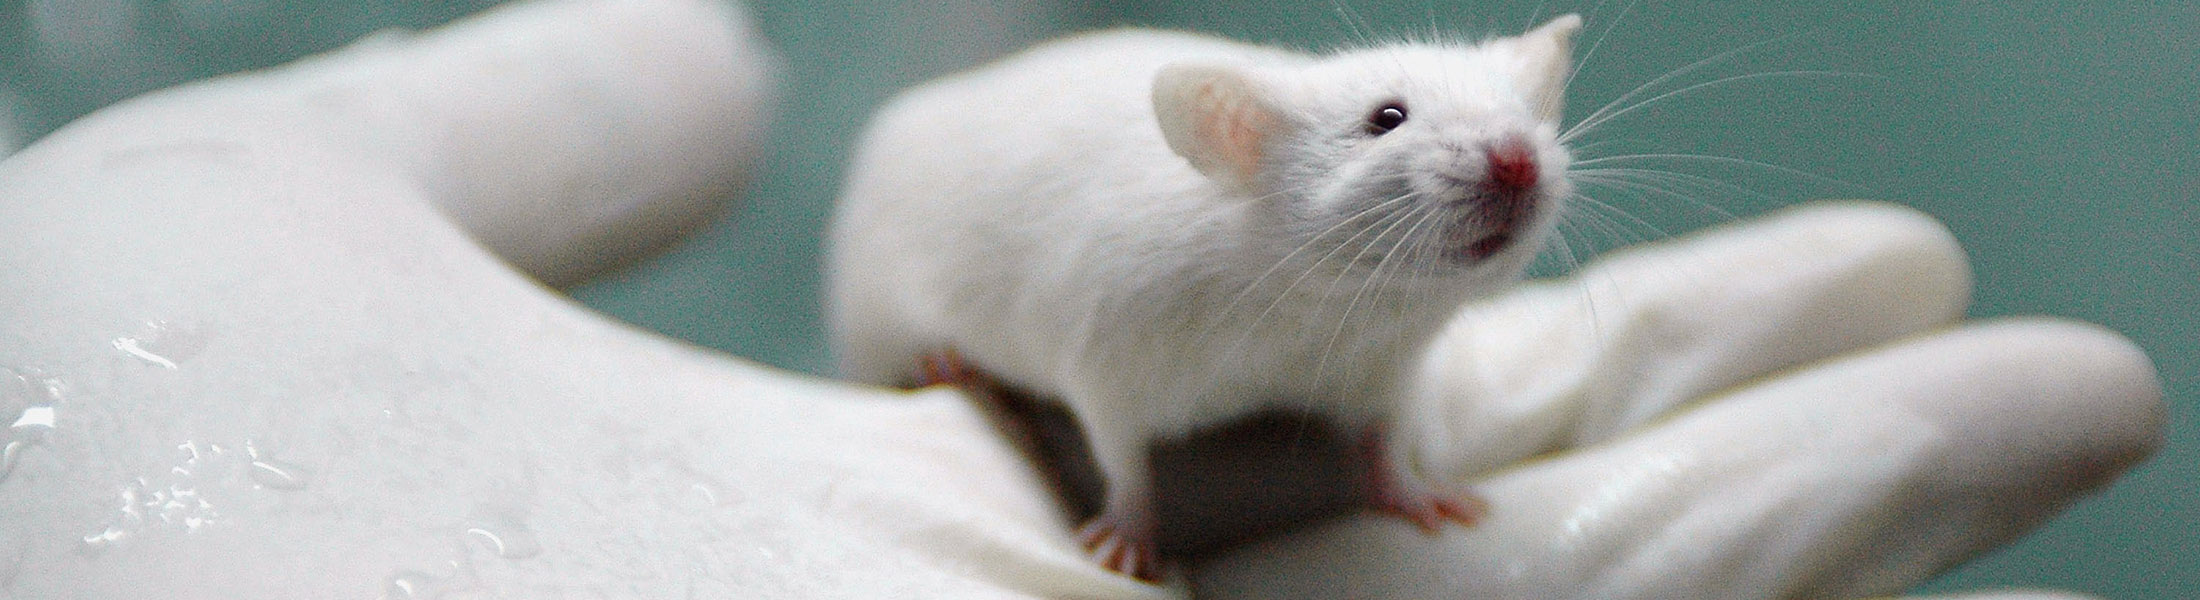 White Rats Used For Gene Therapy Research At The State Key Laboratory of Biotherapy